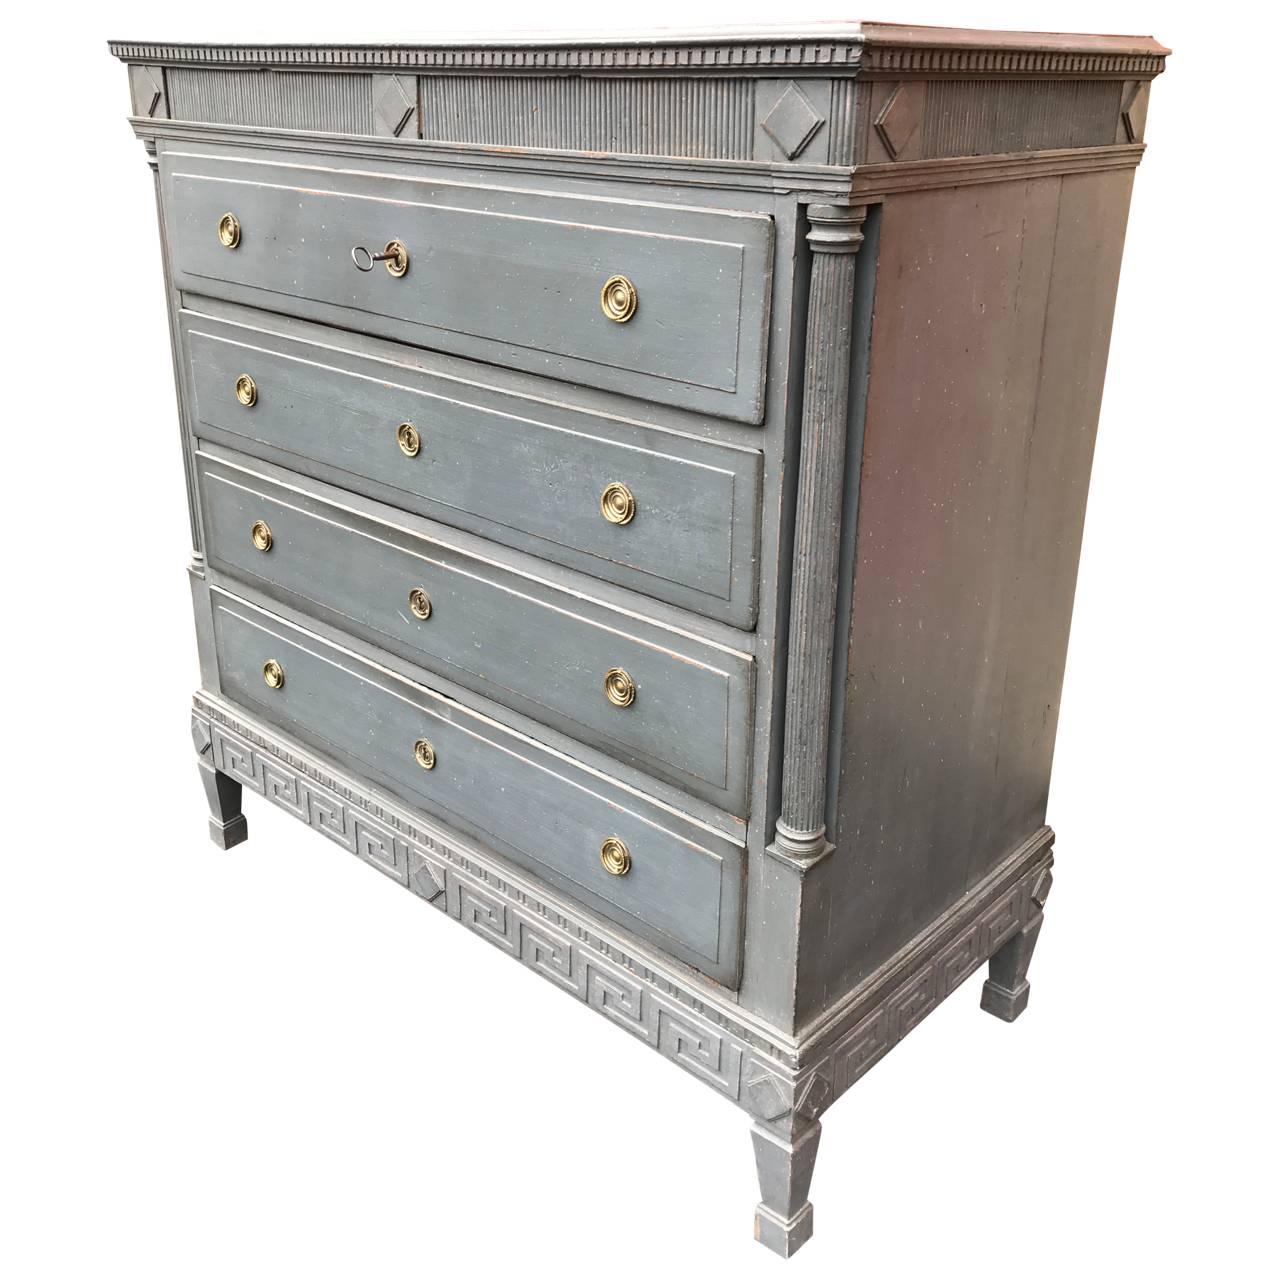 Great period six drawers case piece in dark Gustavian-grey. Two secrets drawers are hidden behind the fretwork and below dental moulding. See detailed image. This case piece has carved rosettes at the top, lovely carved columns and 'a la Grecque'